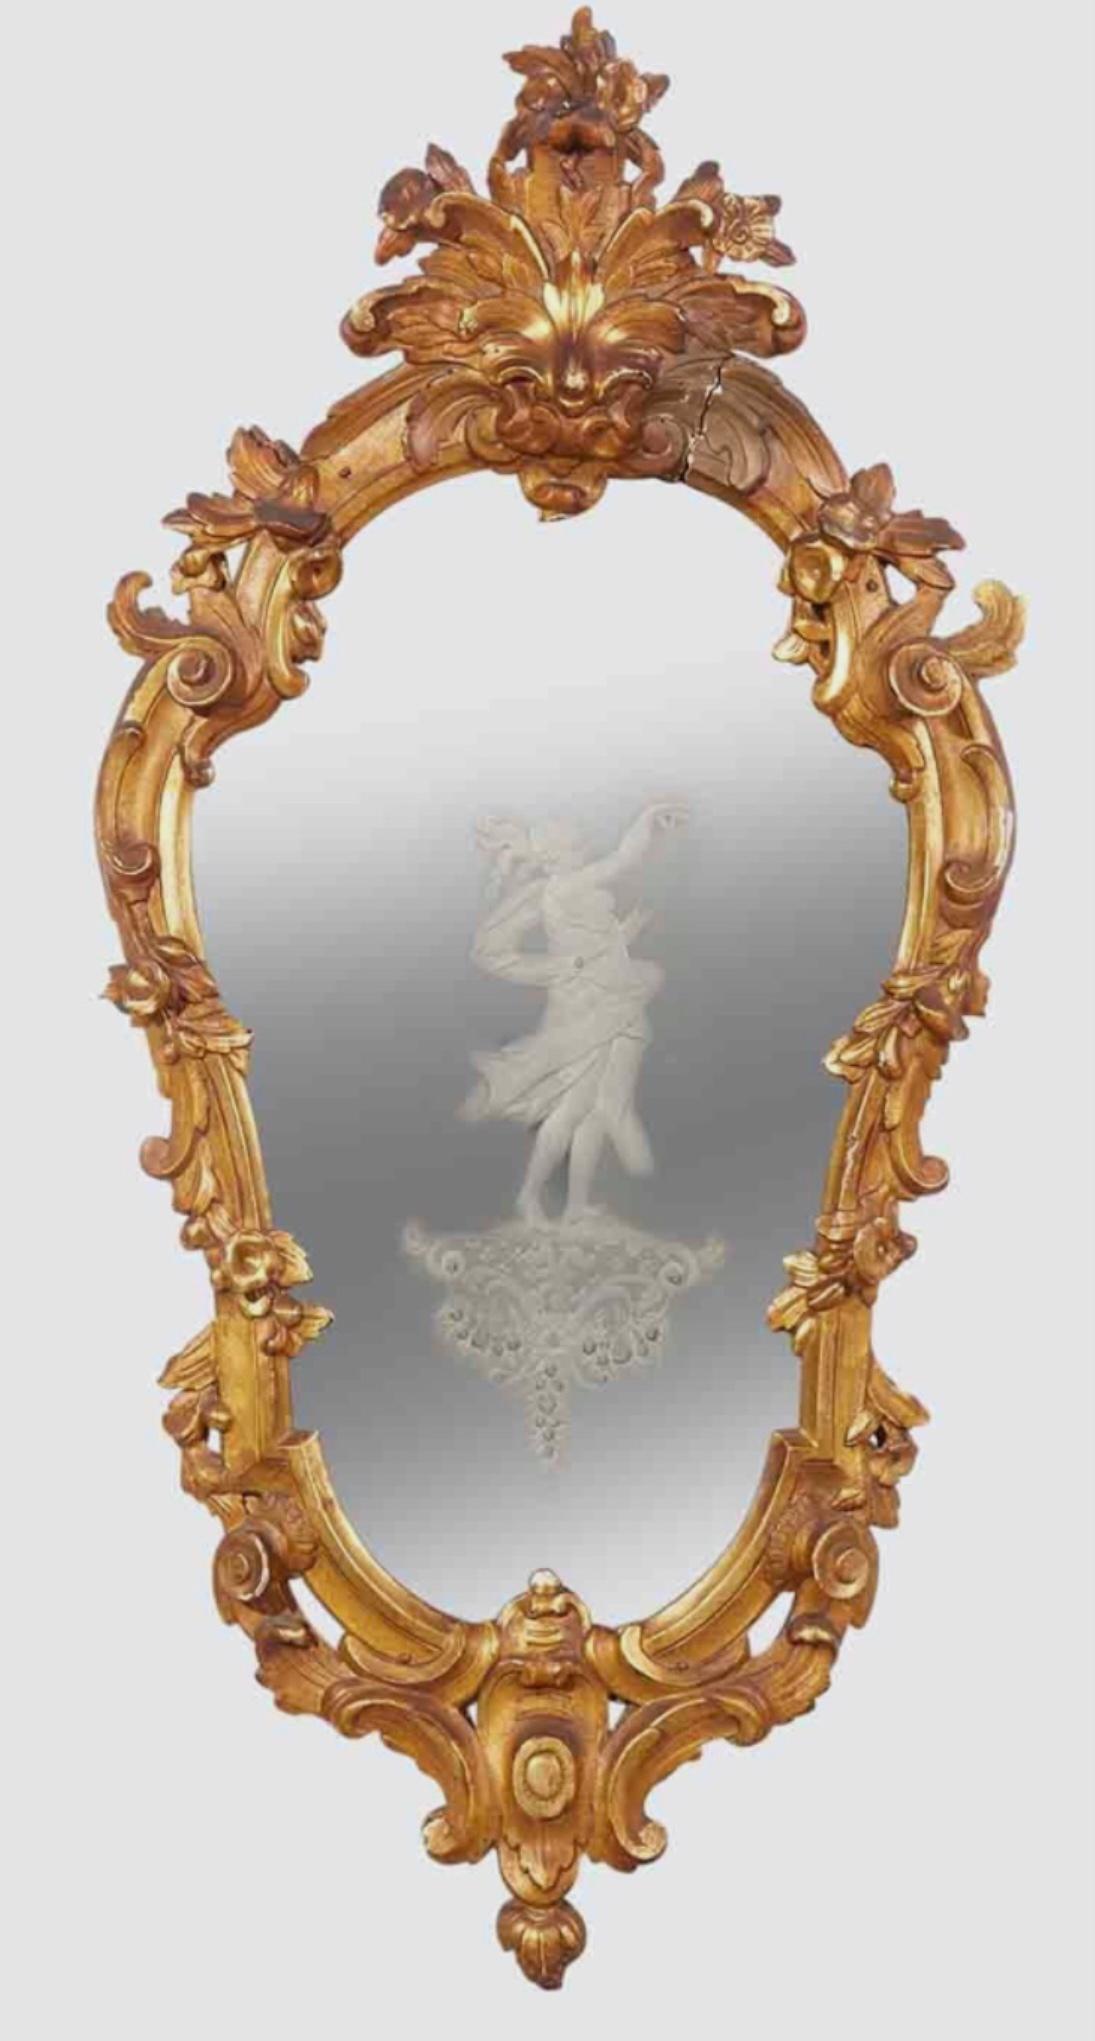 Pair of Venetian Rococo Giltwood Wall Mirrors In Good Condition For Sale In Bradenton, FL